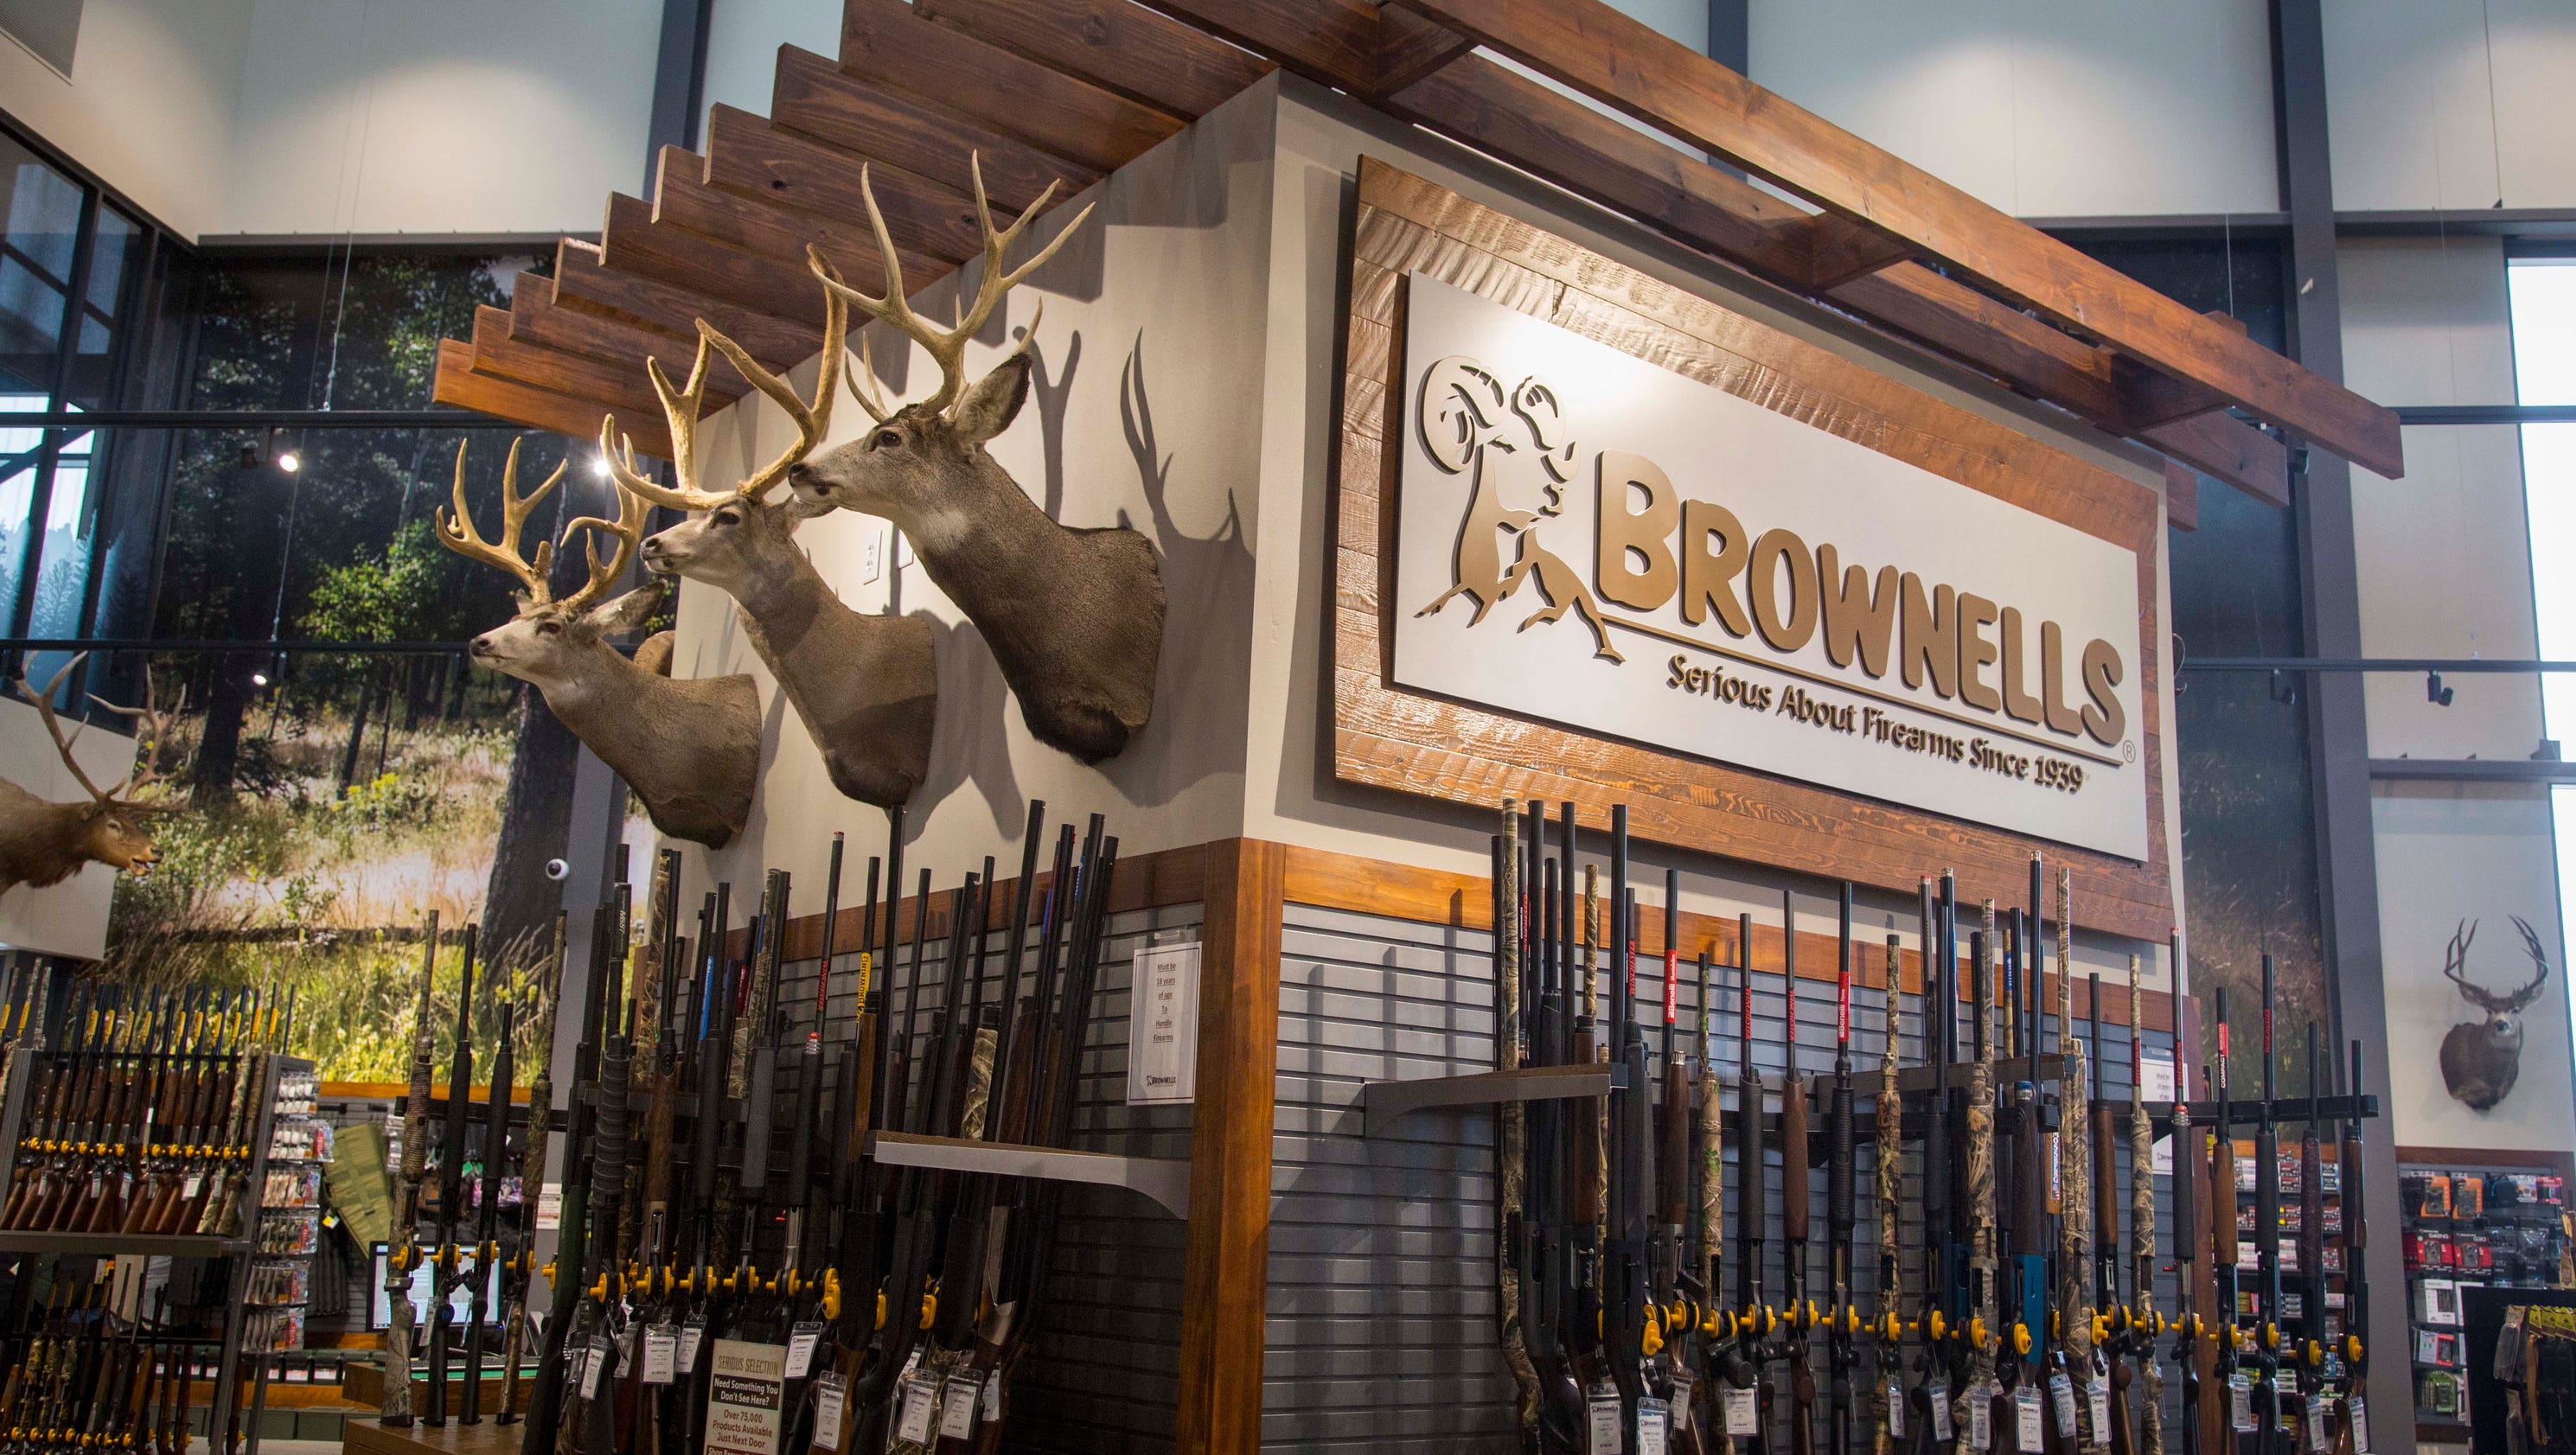 14 photos: See inside Brownells new gun store, warehouse